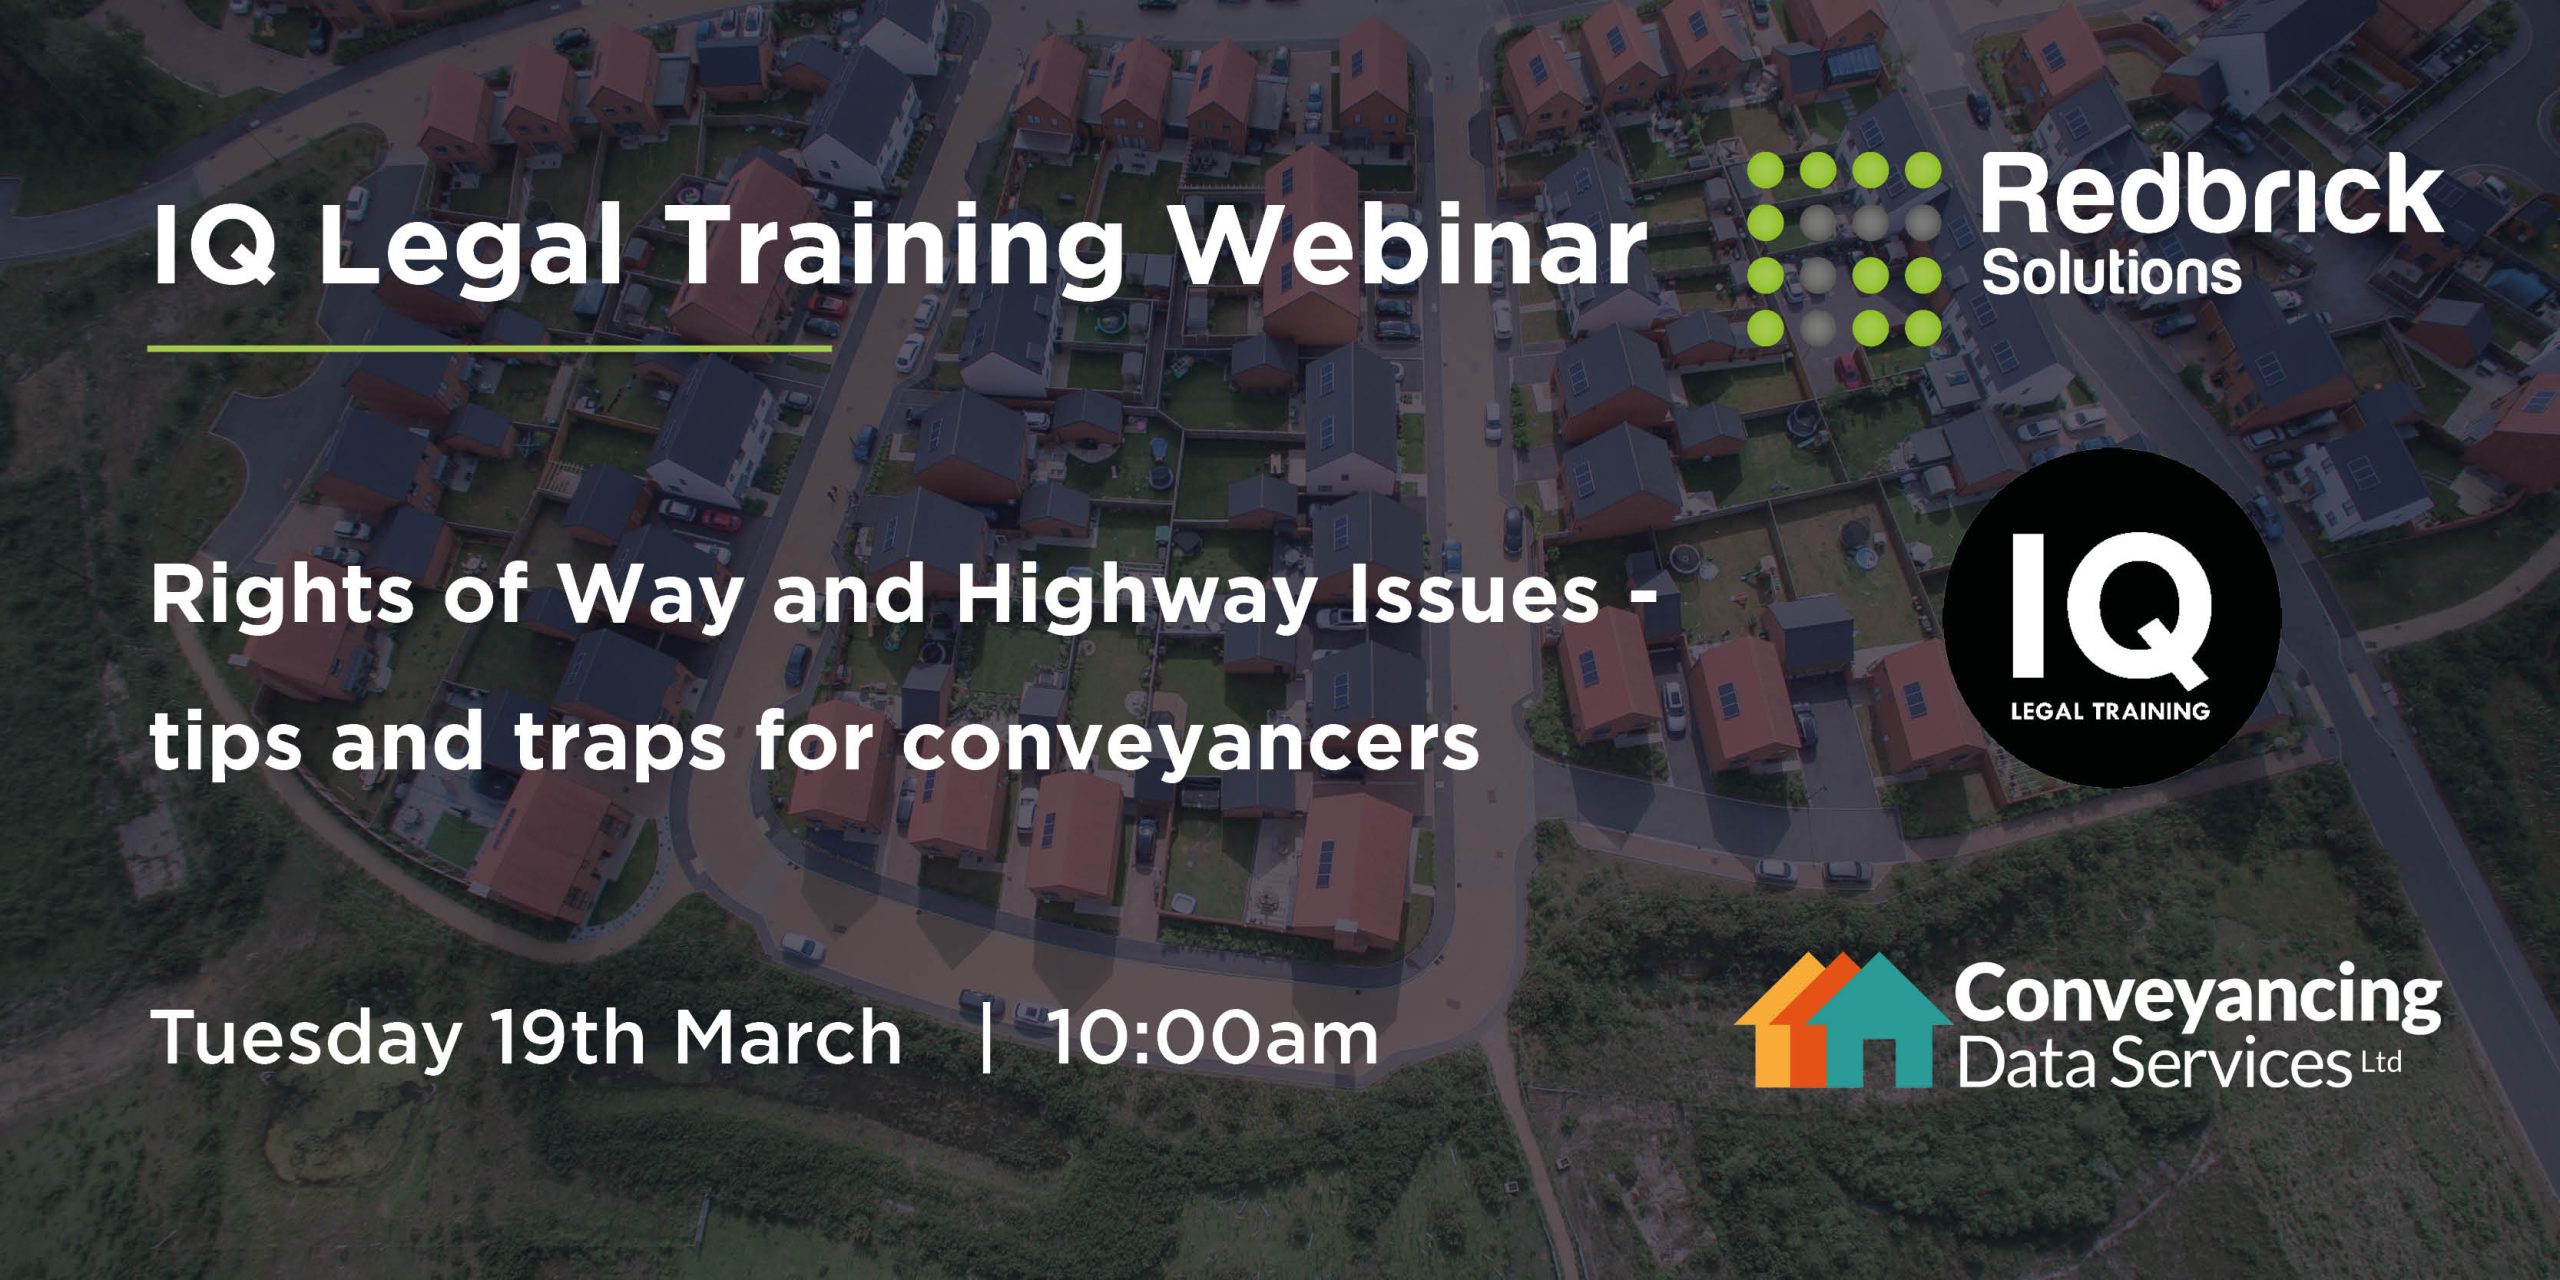 IQ Legal Training Webinar | Rights of Way and Highway Issues – tips and traps for conveyancers